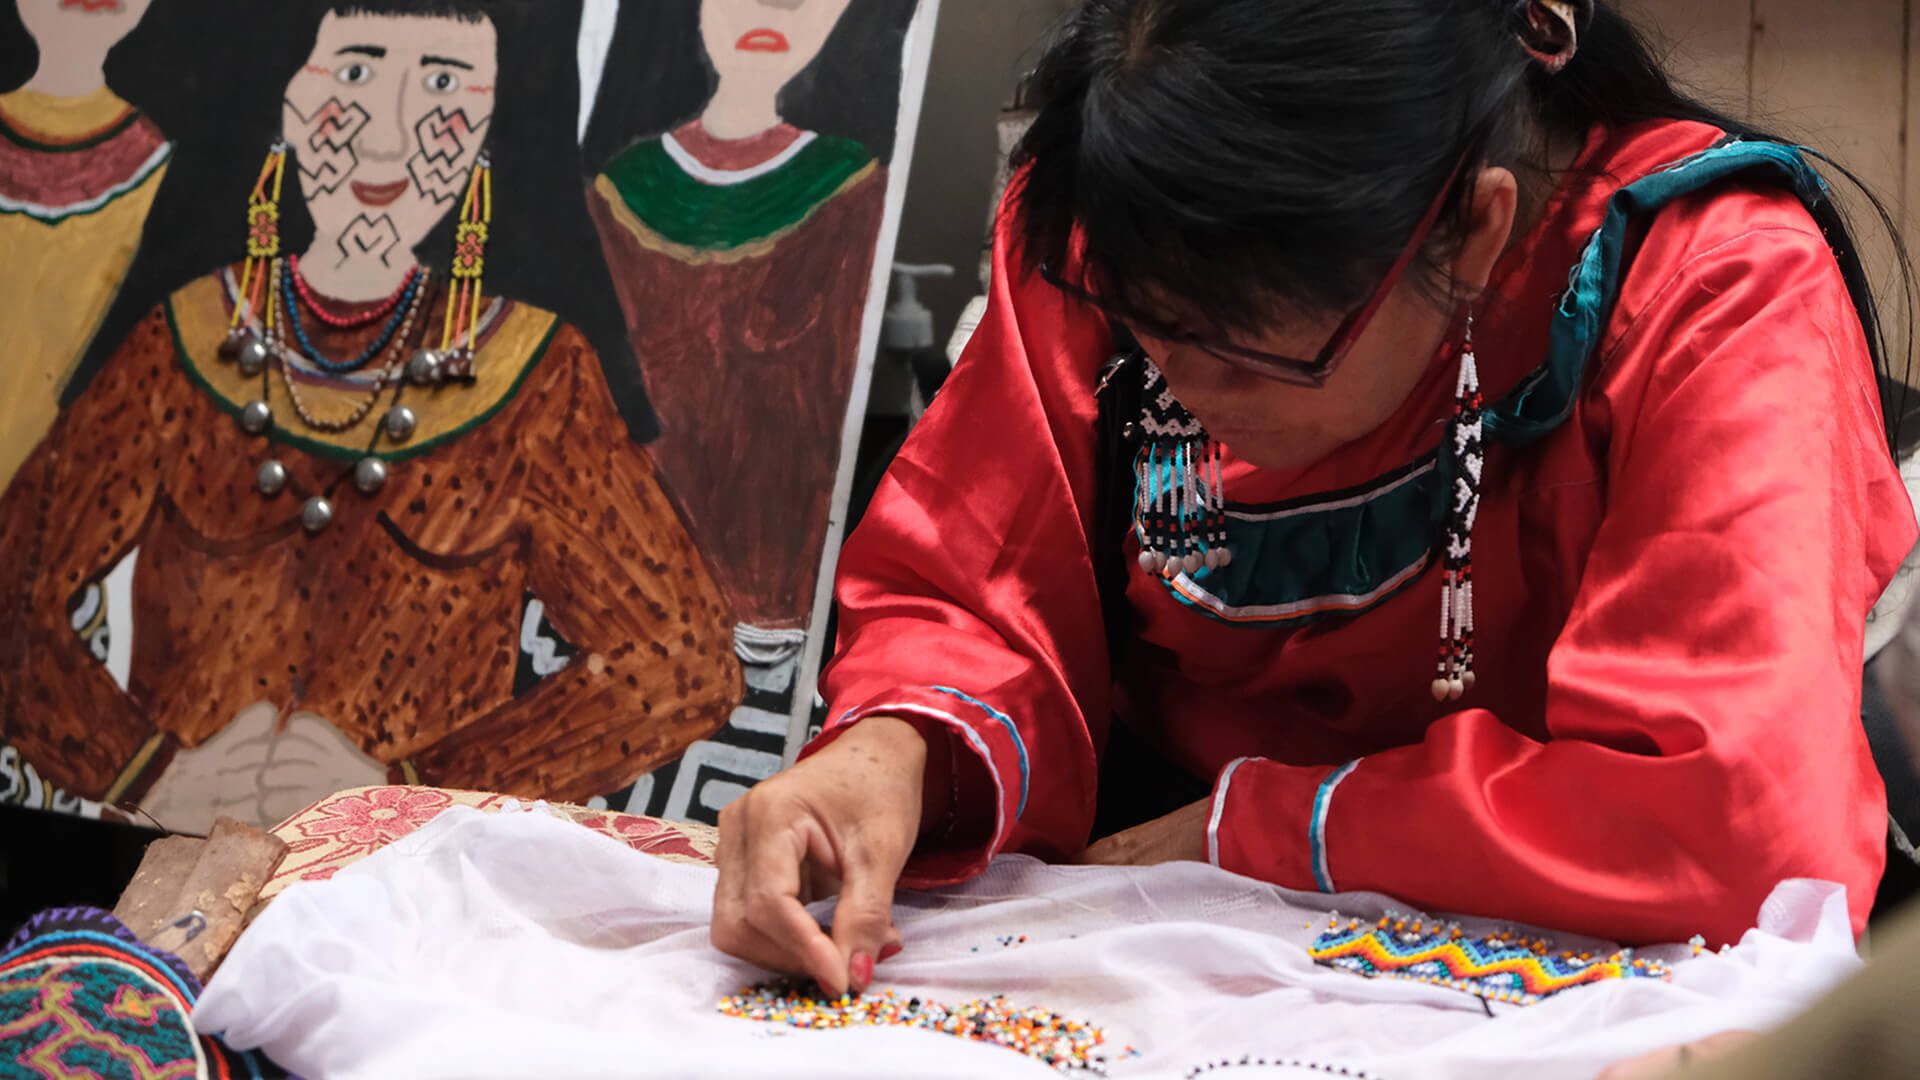 Kene is a typically feminine art, on your visit you'll meet strong women artisans and learn about their work